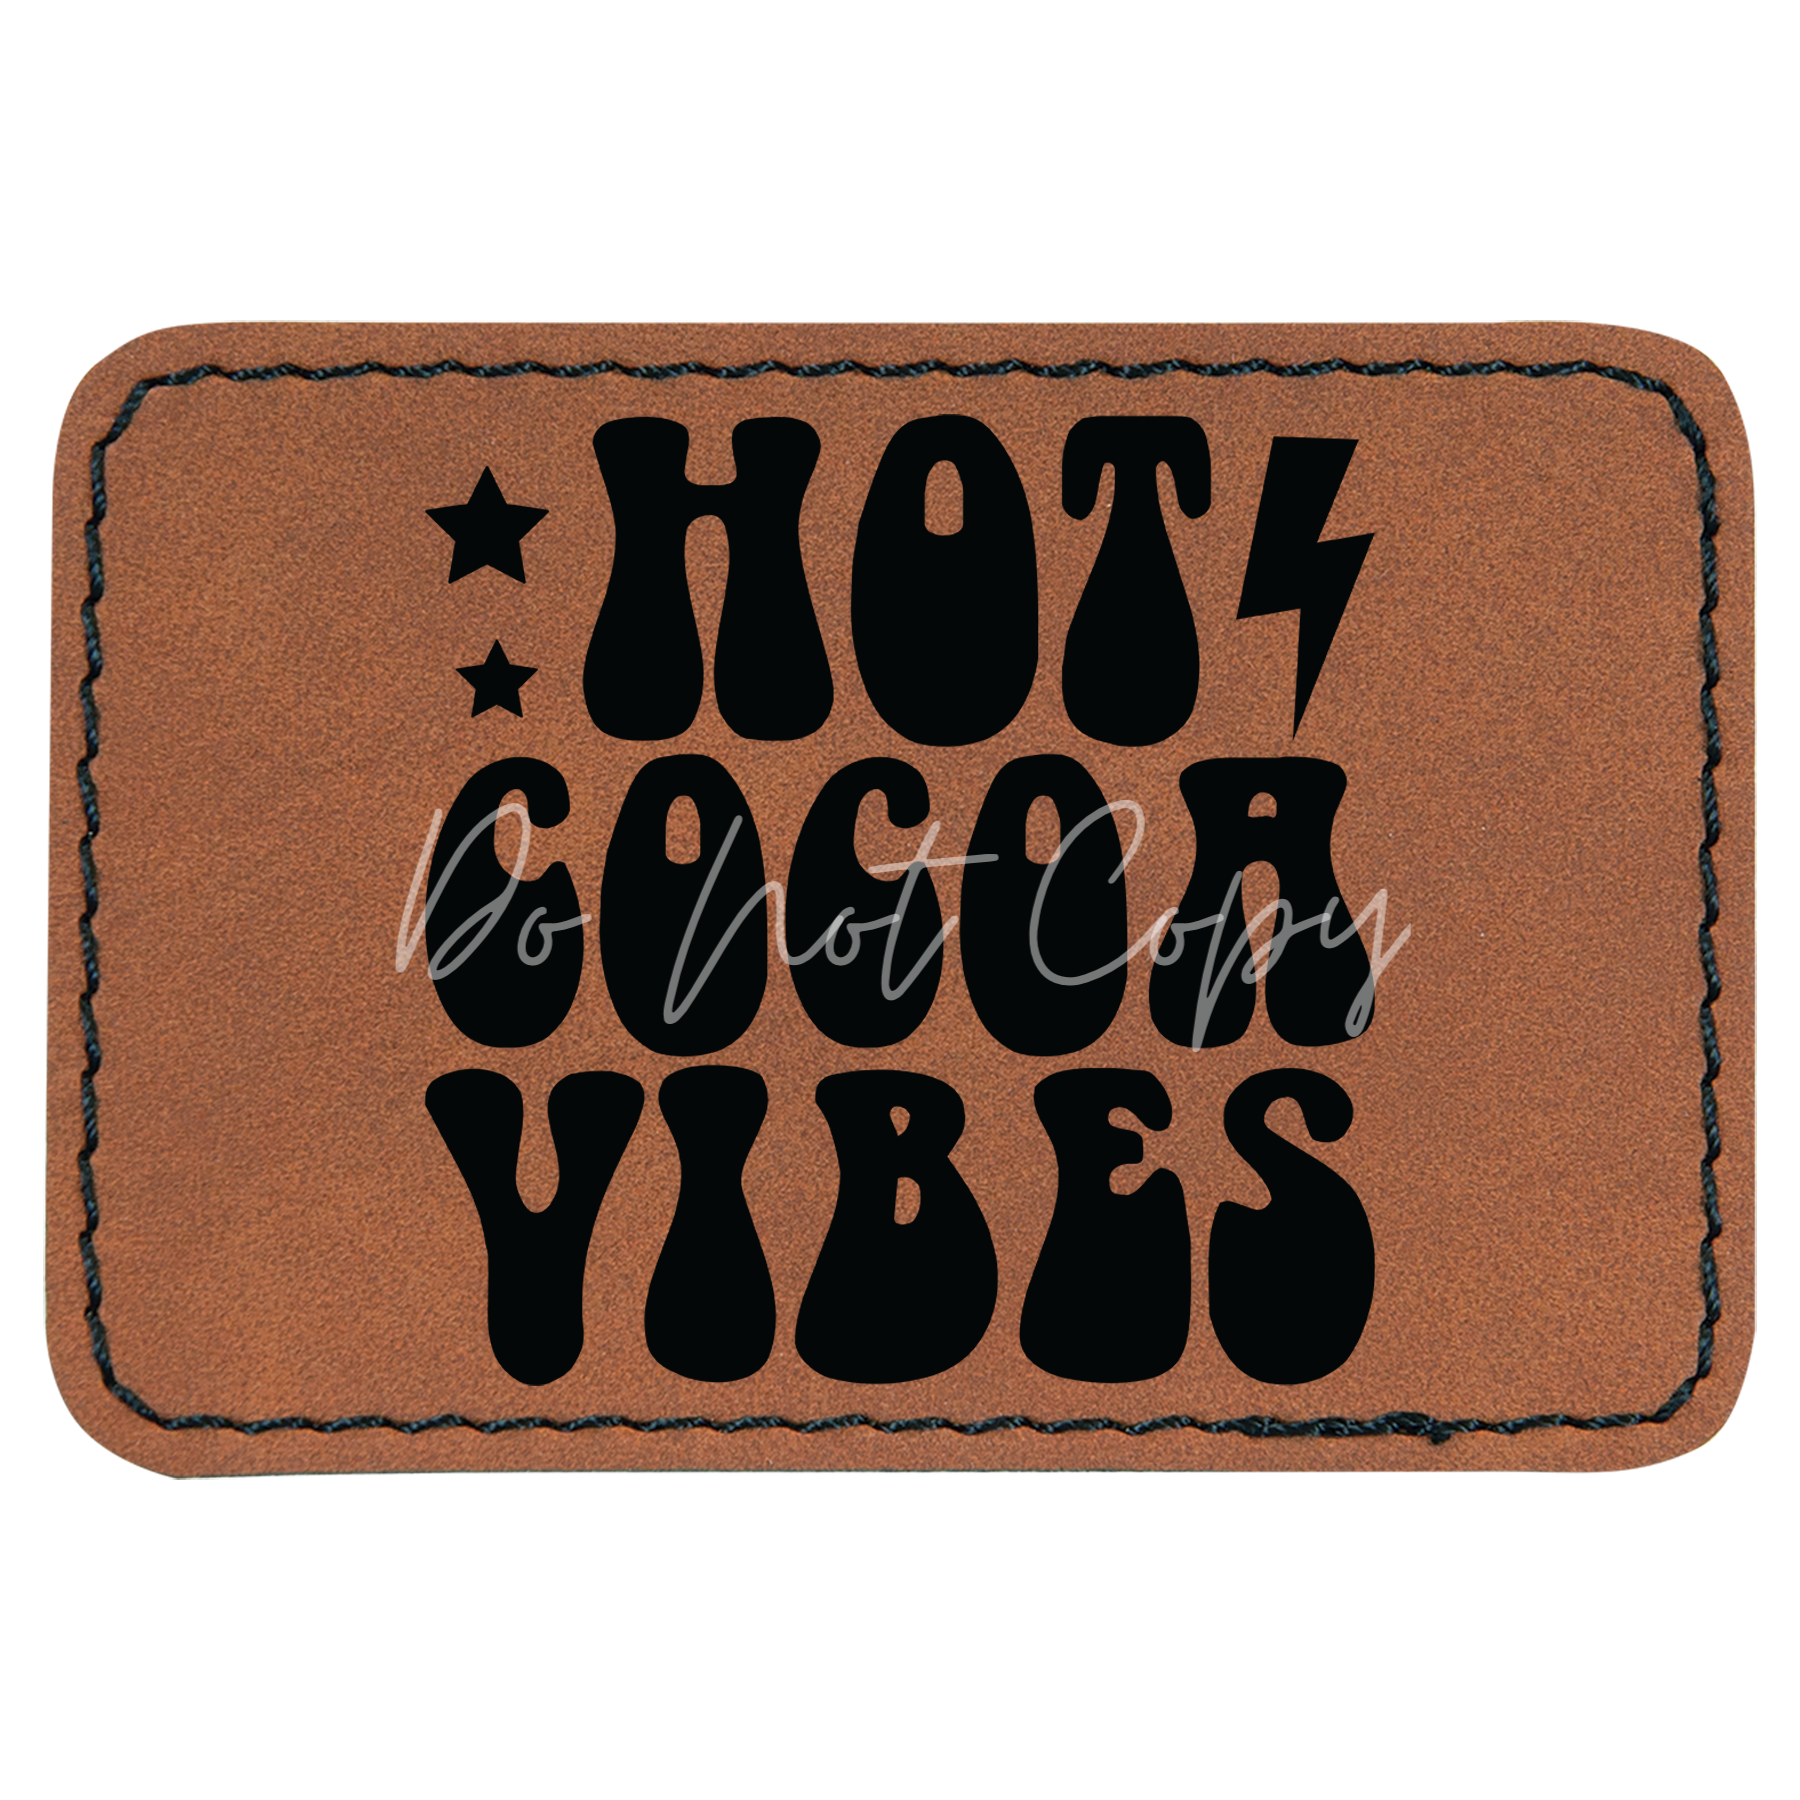 Retro Hot Cocoa Vibes Patch